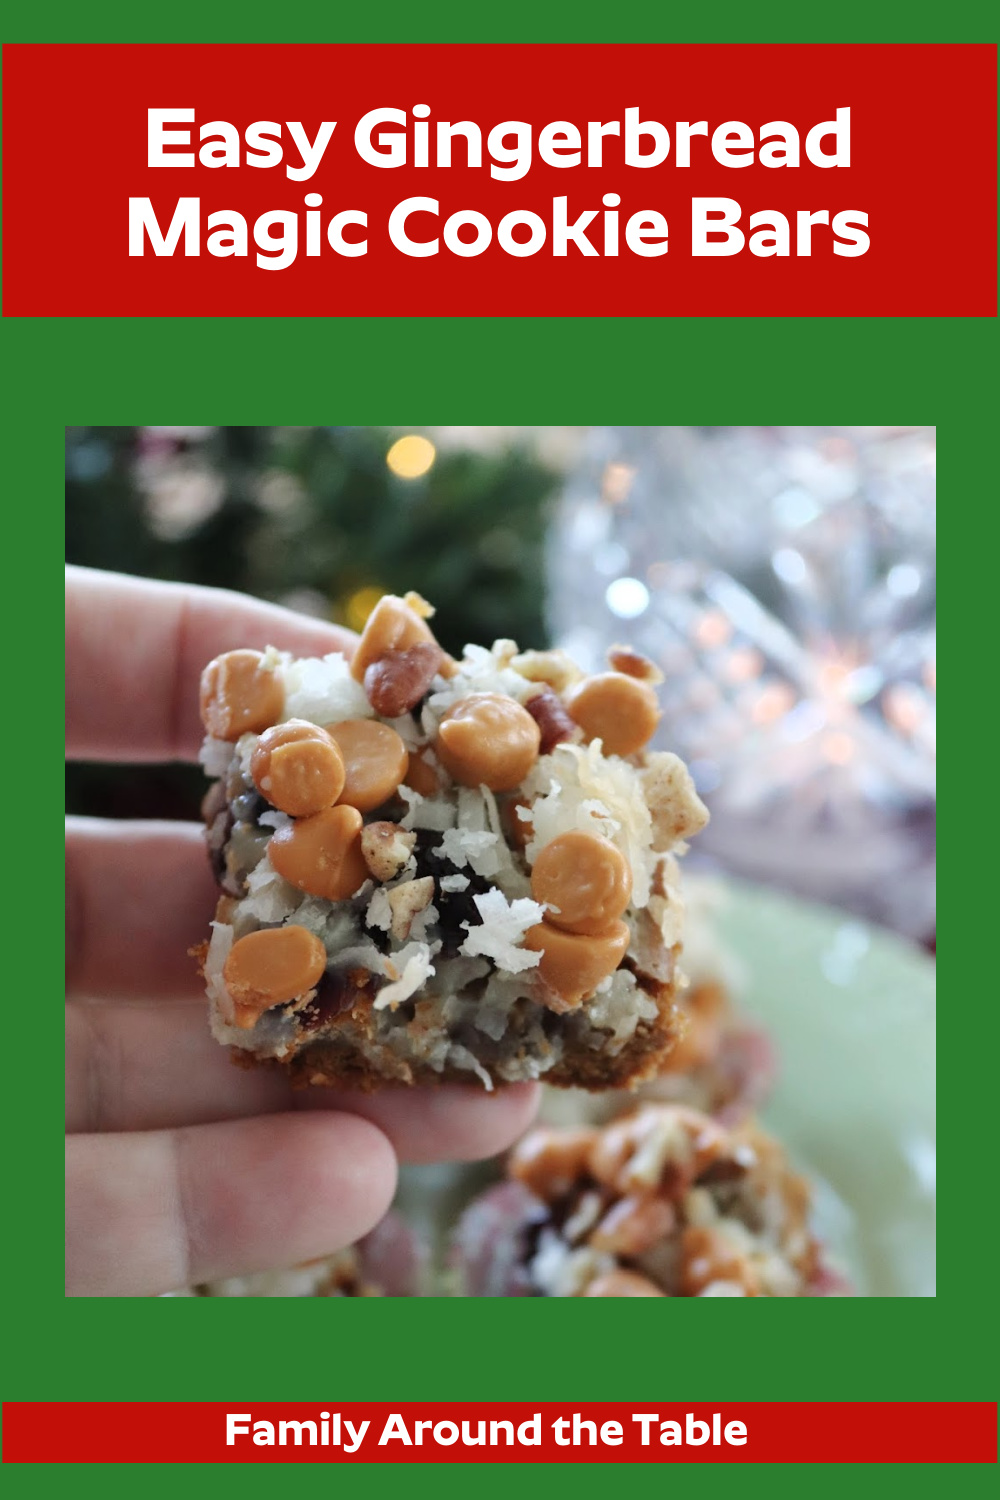 Easy Gingerbread Magic Cookie Bars Pinterest Image.